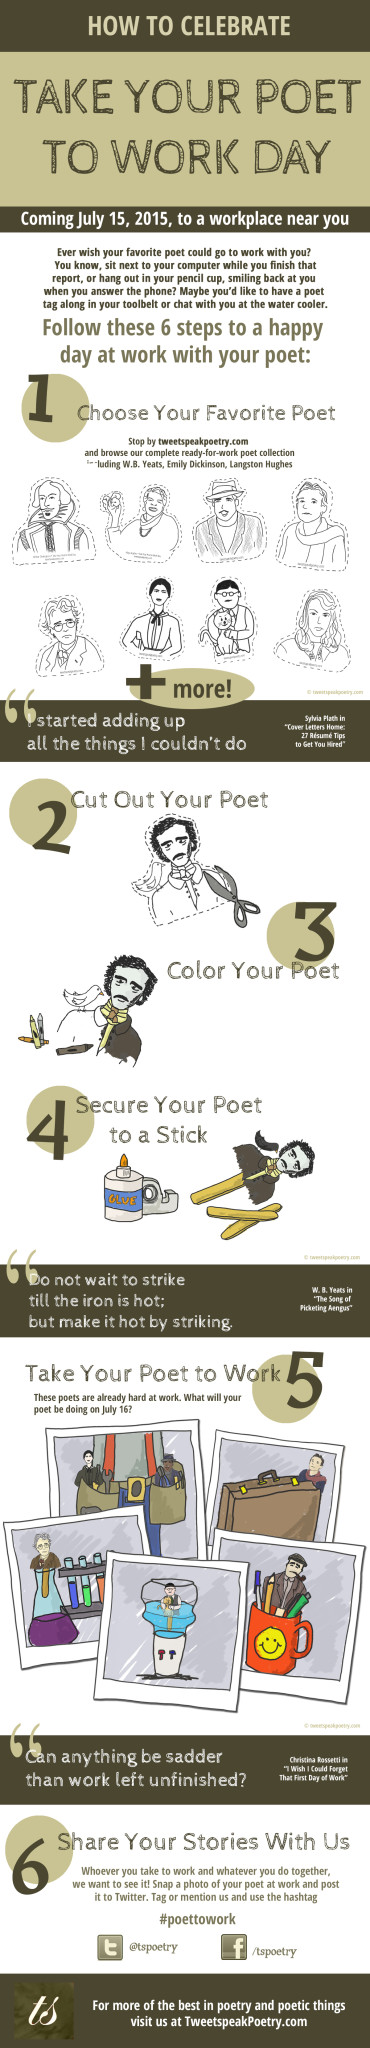 Take Your Poet to Work Day 2015 Infographic